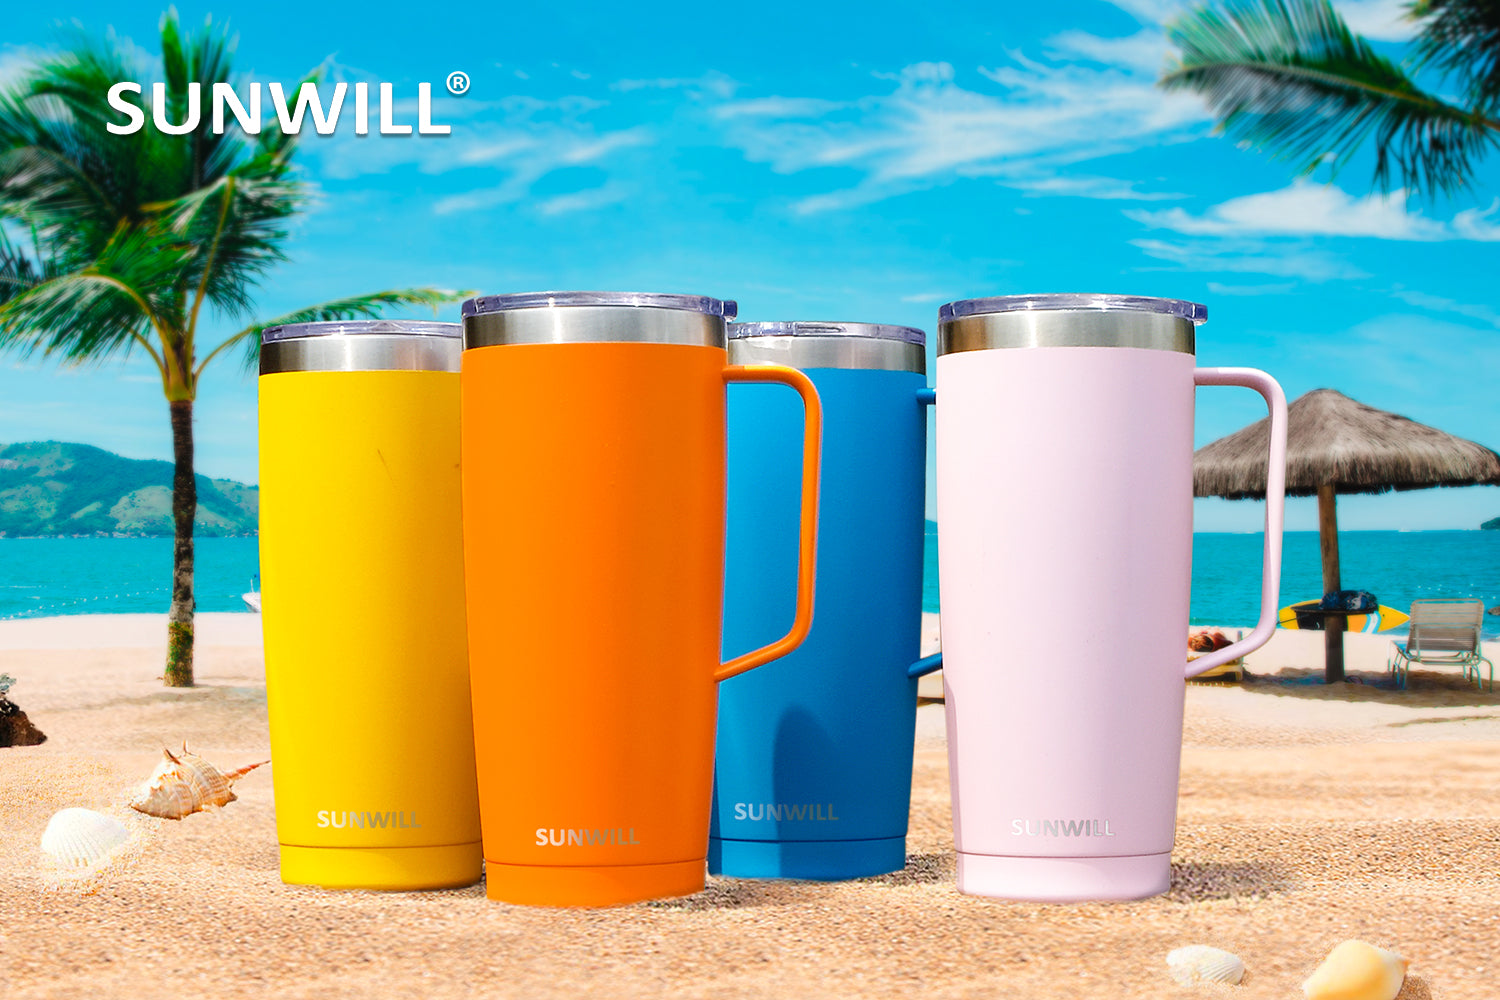  SUNWILL 14 oz Coffee Mug, Vacuum Insulated Camping Mug with  Lid, Double Wall Stainless Steel Travel Tumbler Cup, Coffee Thermos  Outdoor, Powder Coated Teal : Home & Kitchen